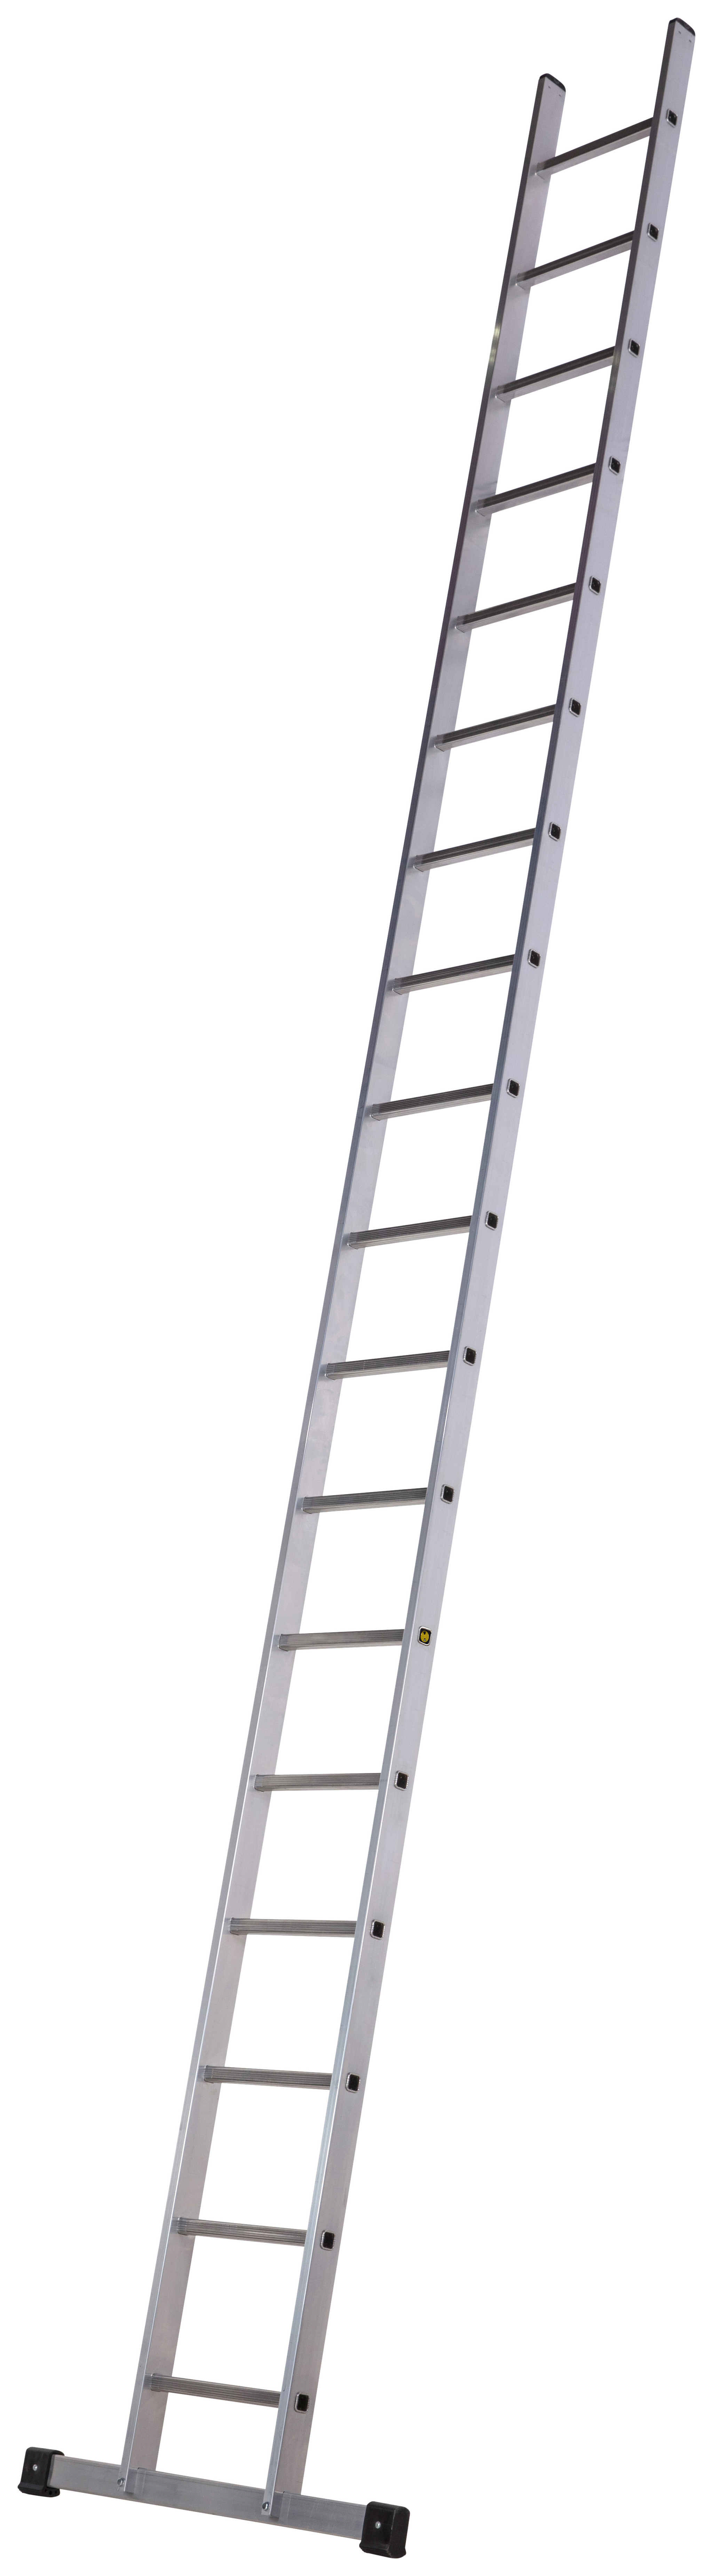 Werner Square Rung Pro Single Section Trade Ladder - 5.3m